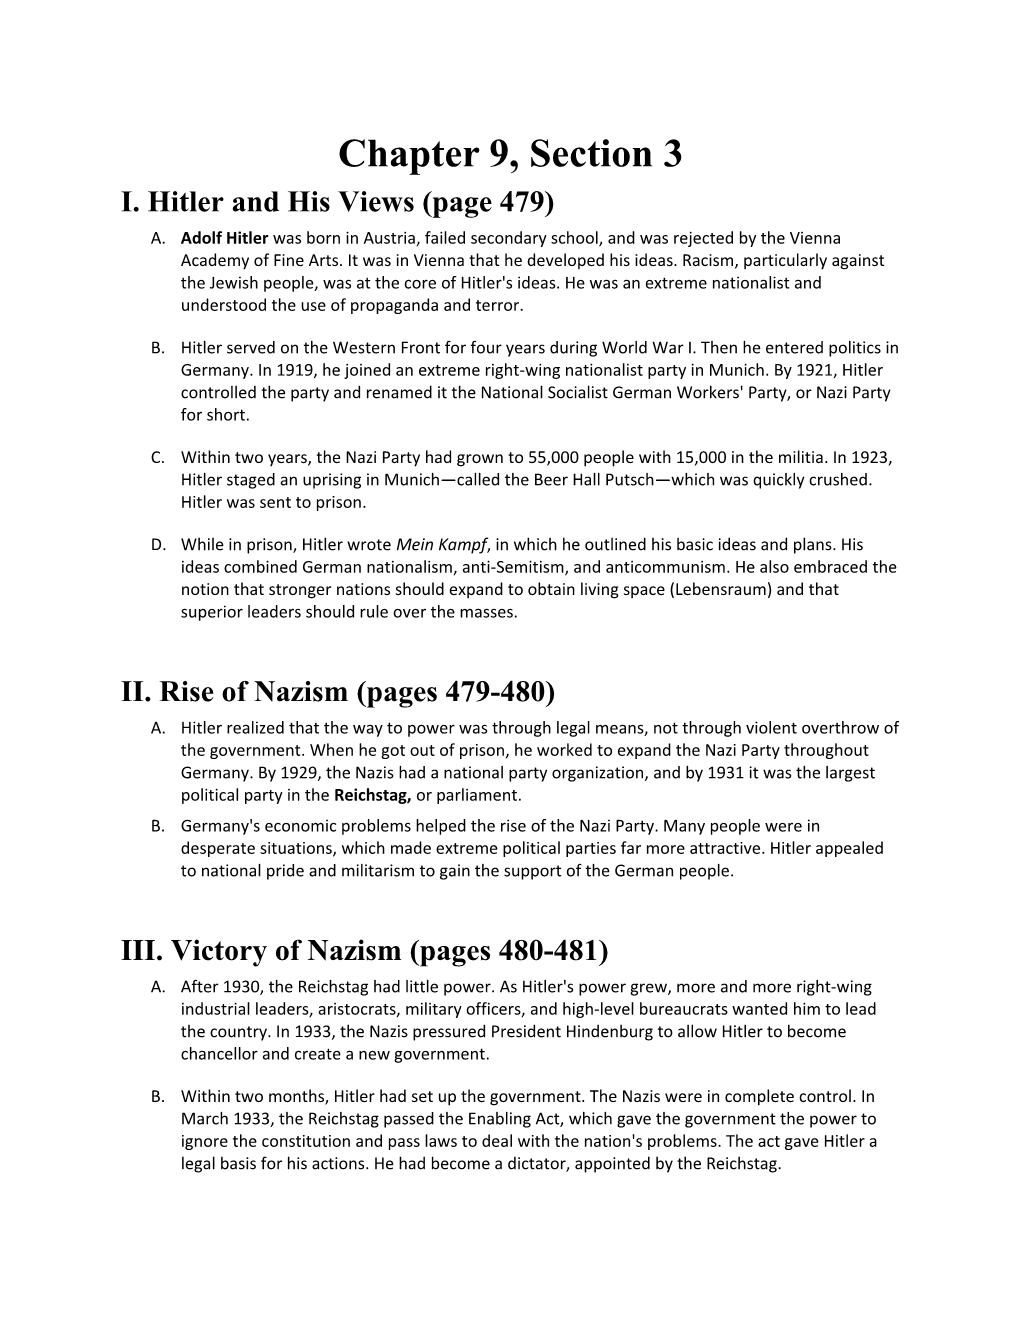 I. Hitler and His Views (Page 479)